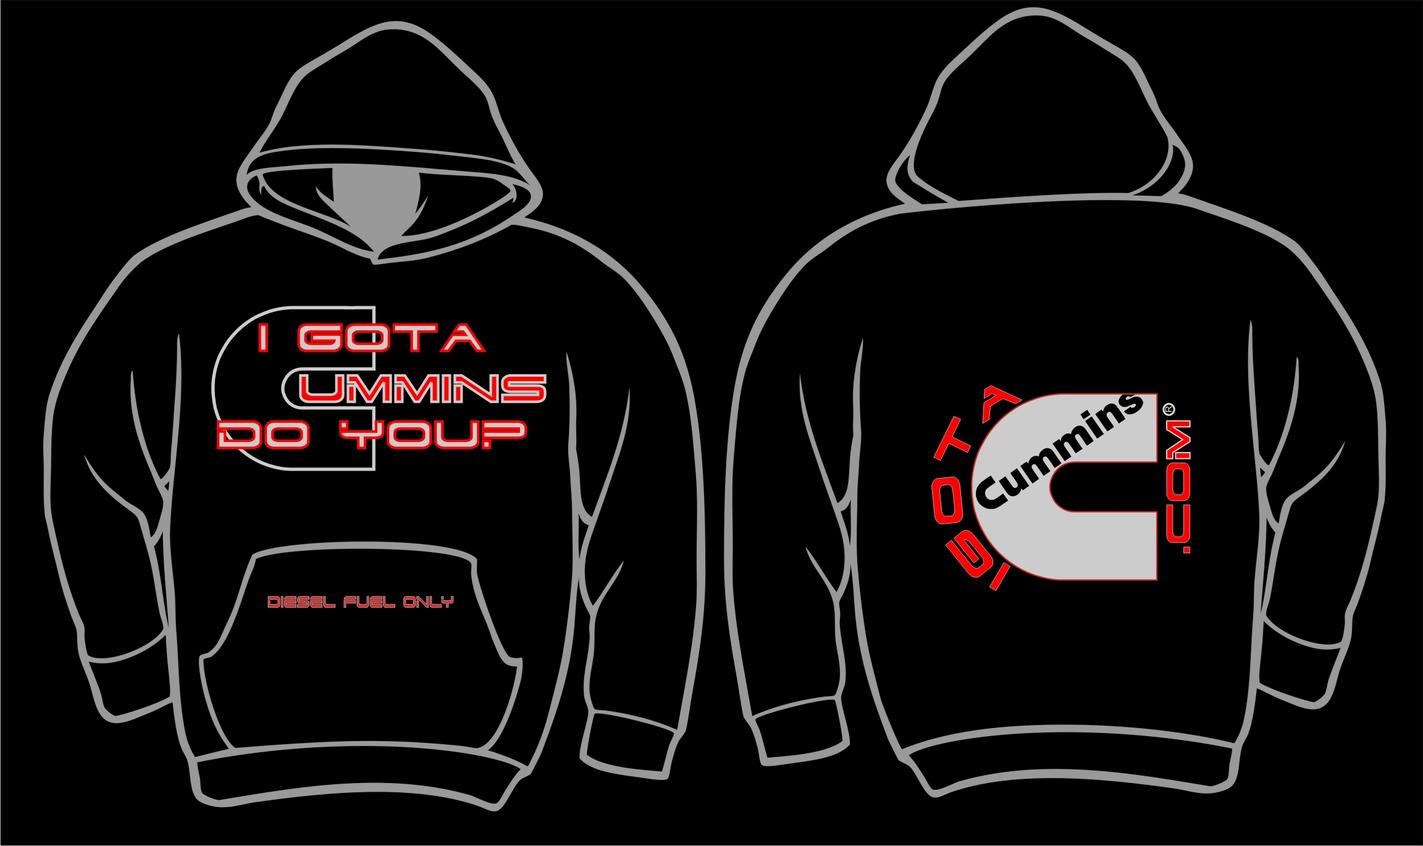 Please visit our store to purchase all your IGOTACUMMINS.COM Apparel & Stickers.